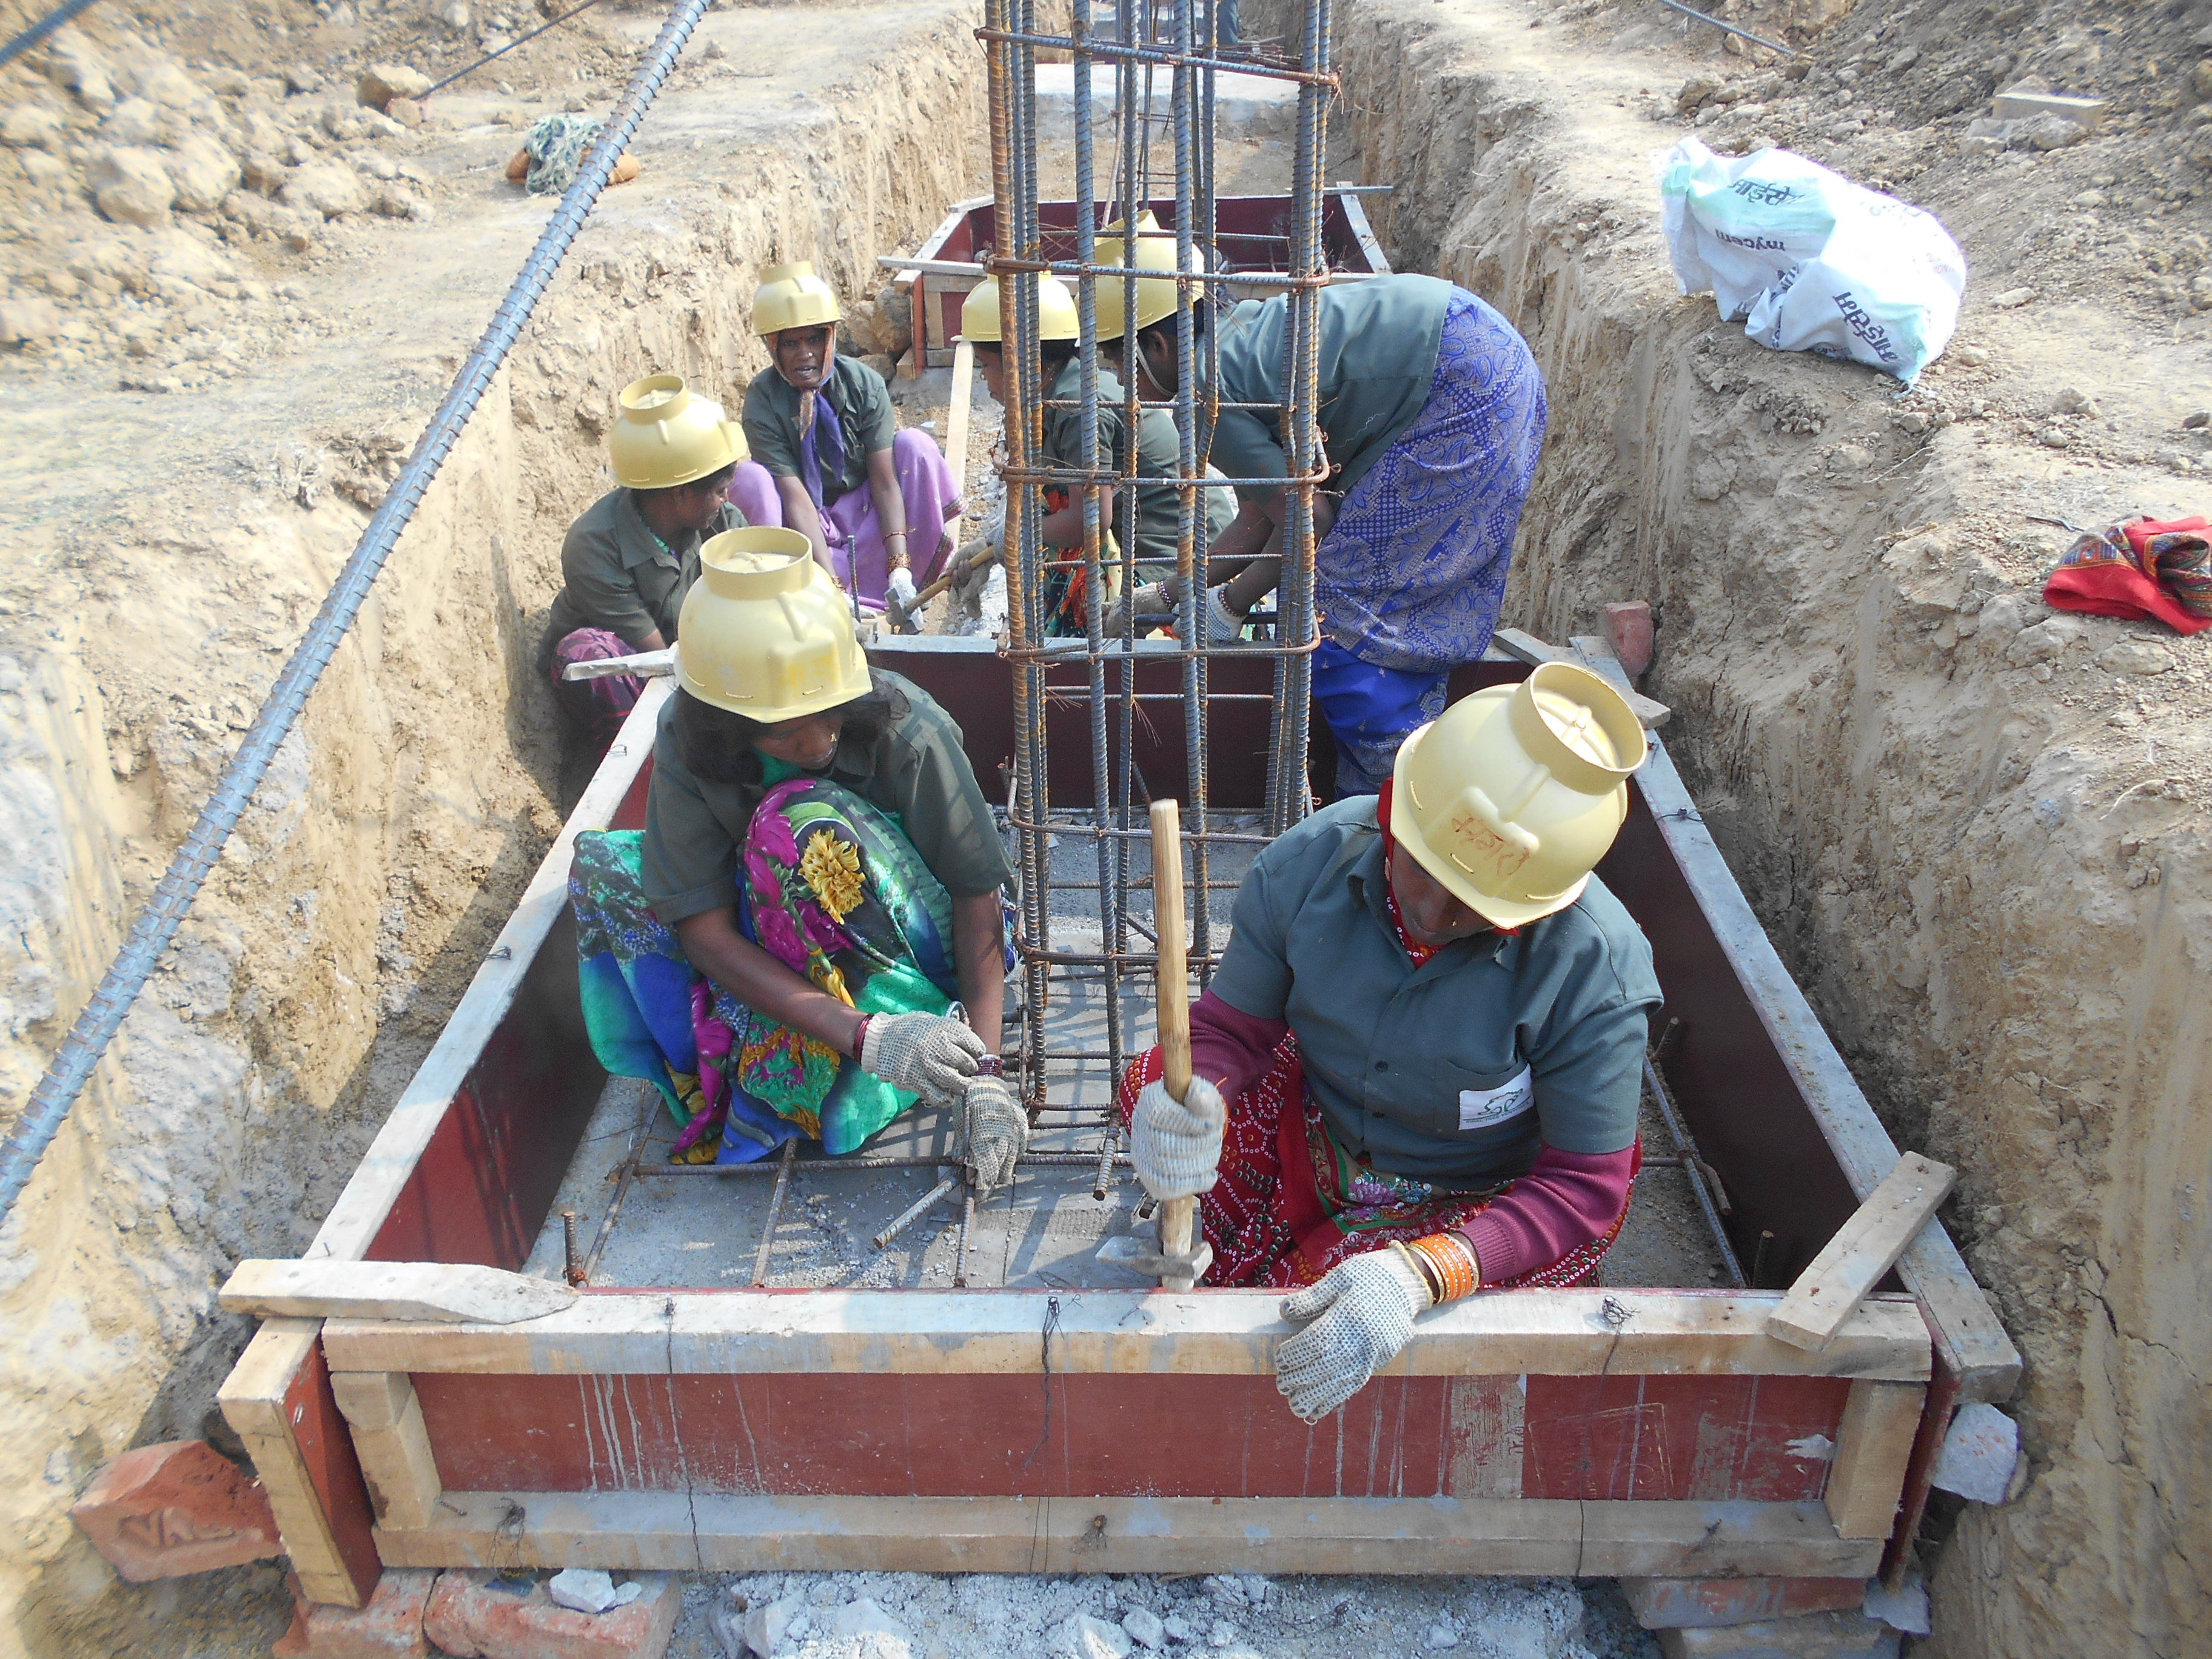 This industrious band of female masons is expertly managing all the work at the construction site in Sonbhadra district of Uttar Pradesh.